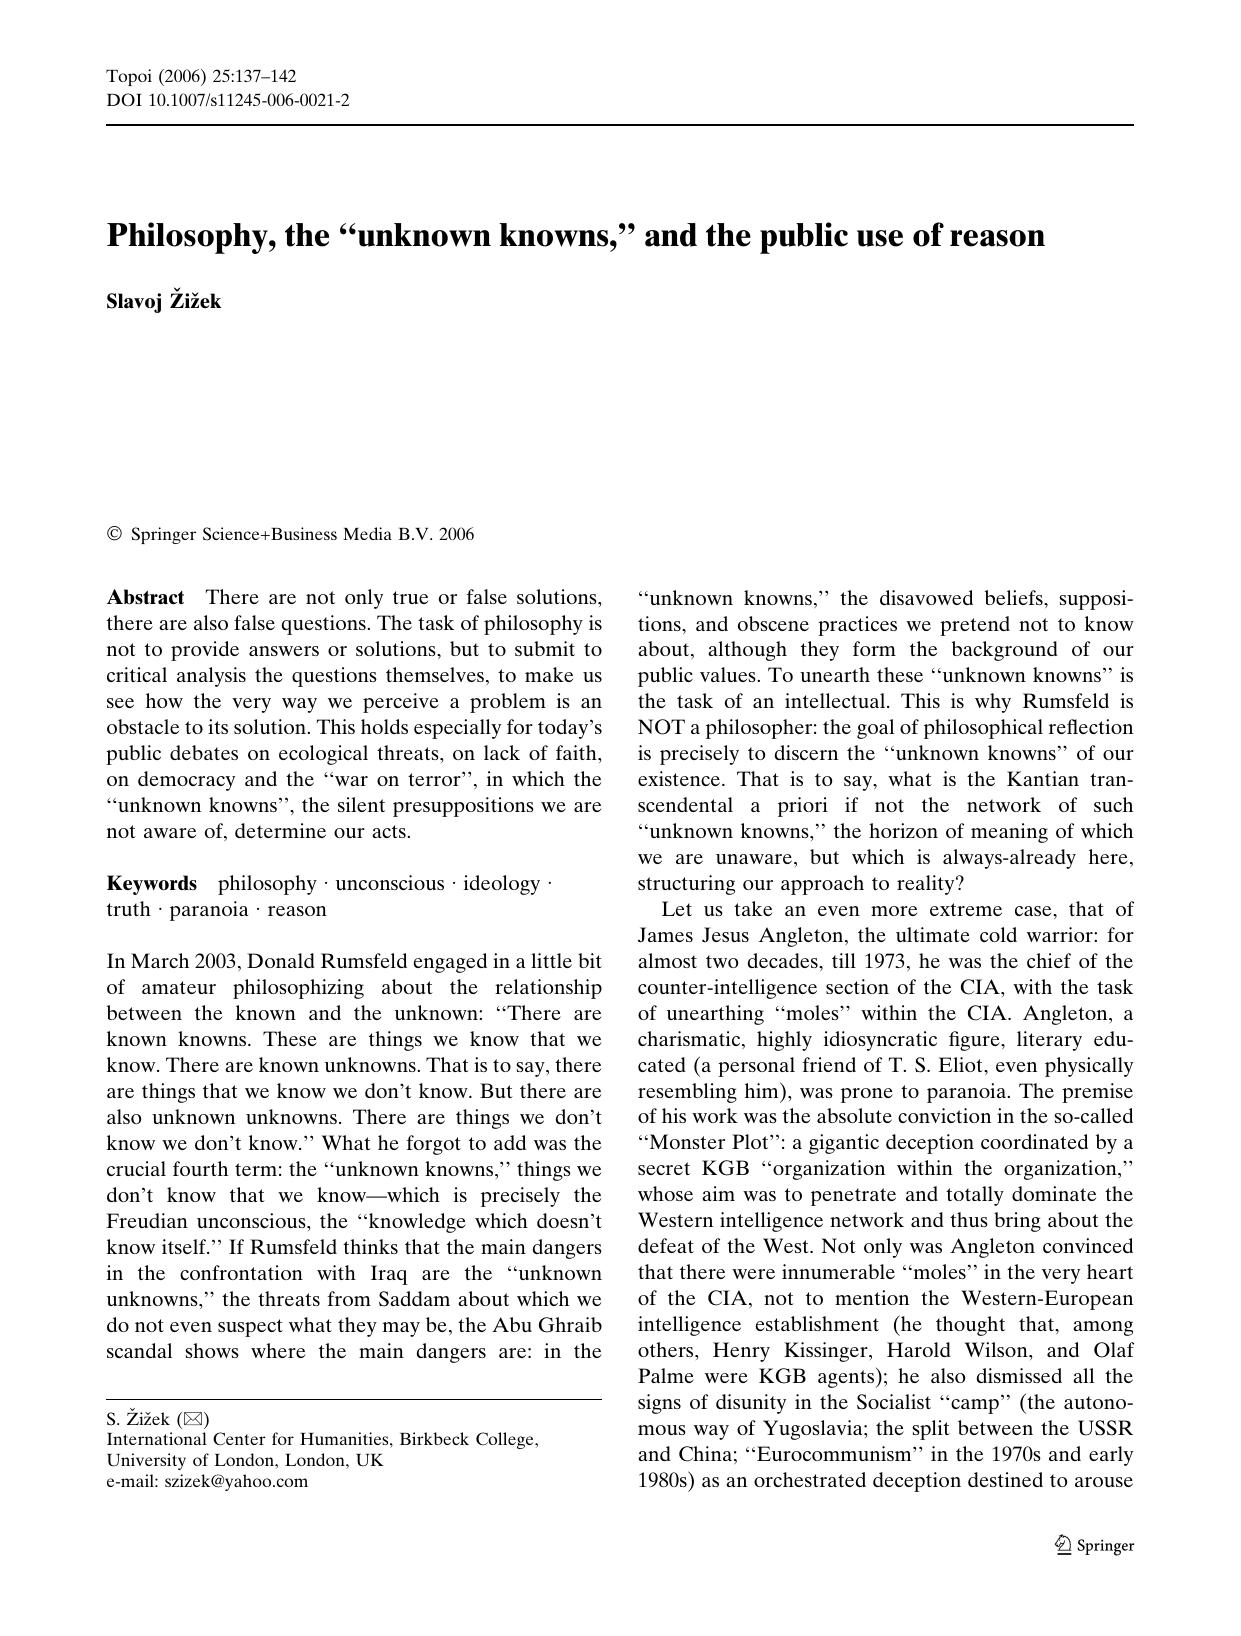 Philosophy, the 'unknown knowns' and the public use of reason - Paper